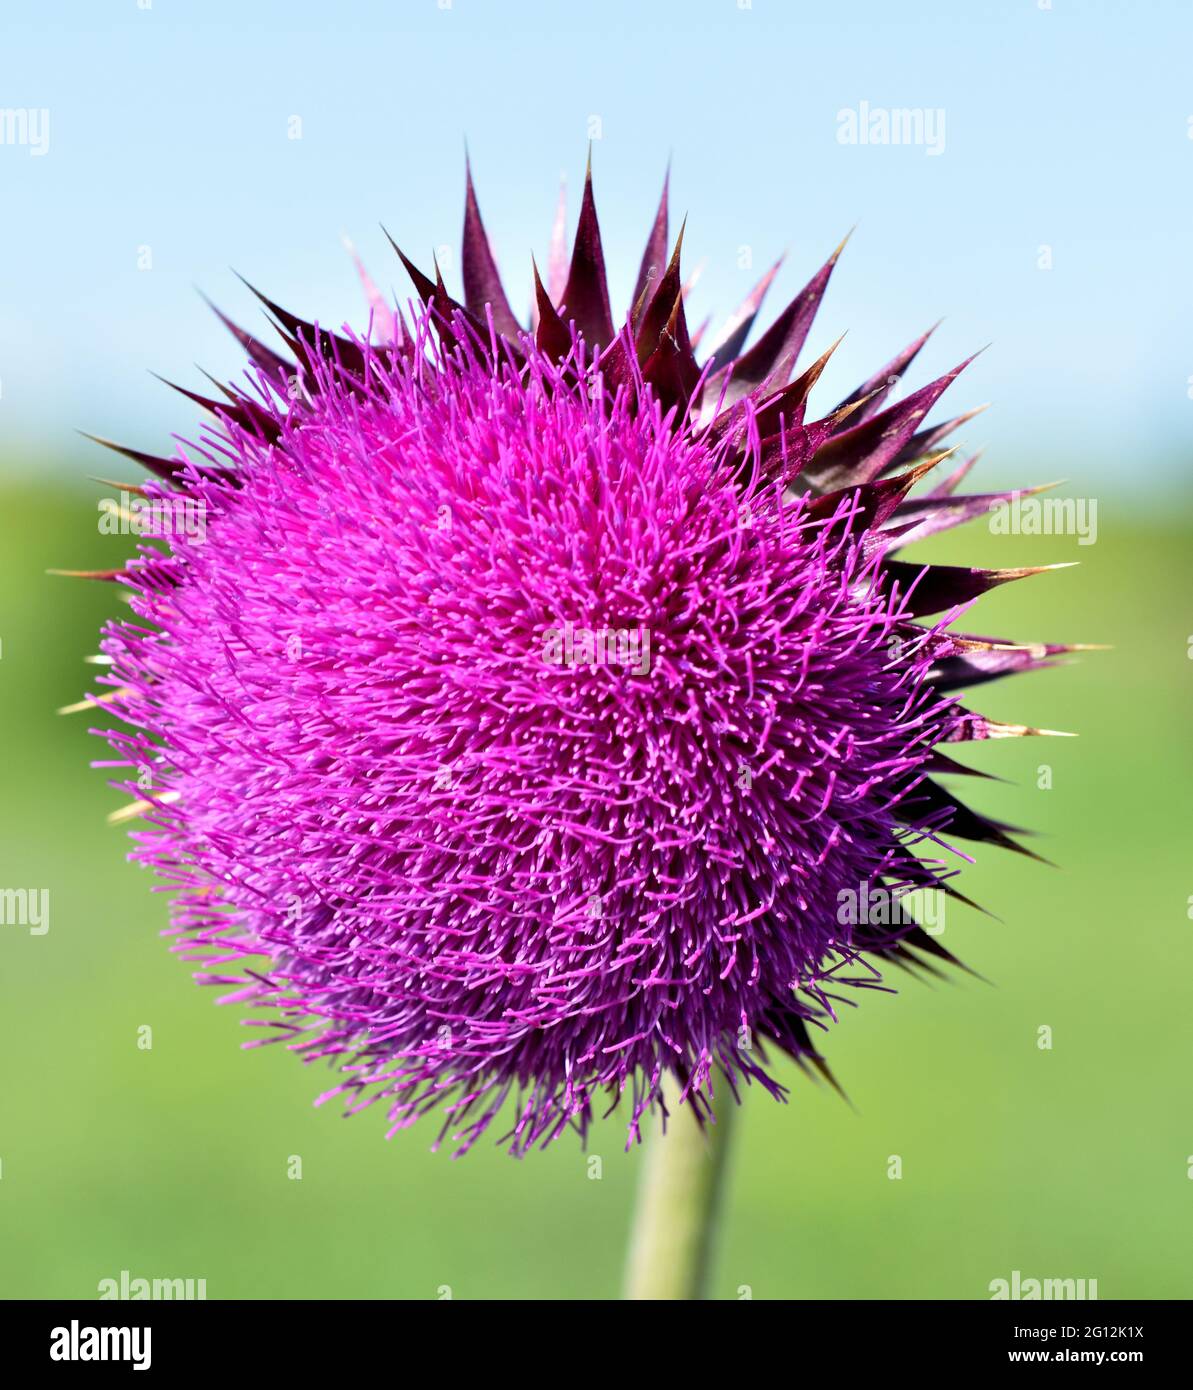 A close up image of full purple bloom of a musk thistle (Carduus nutans) in a prairie setting. Stock Photo